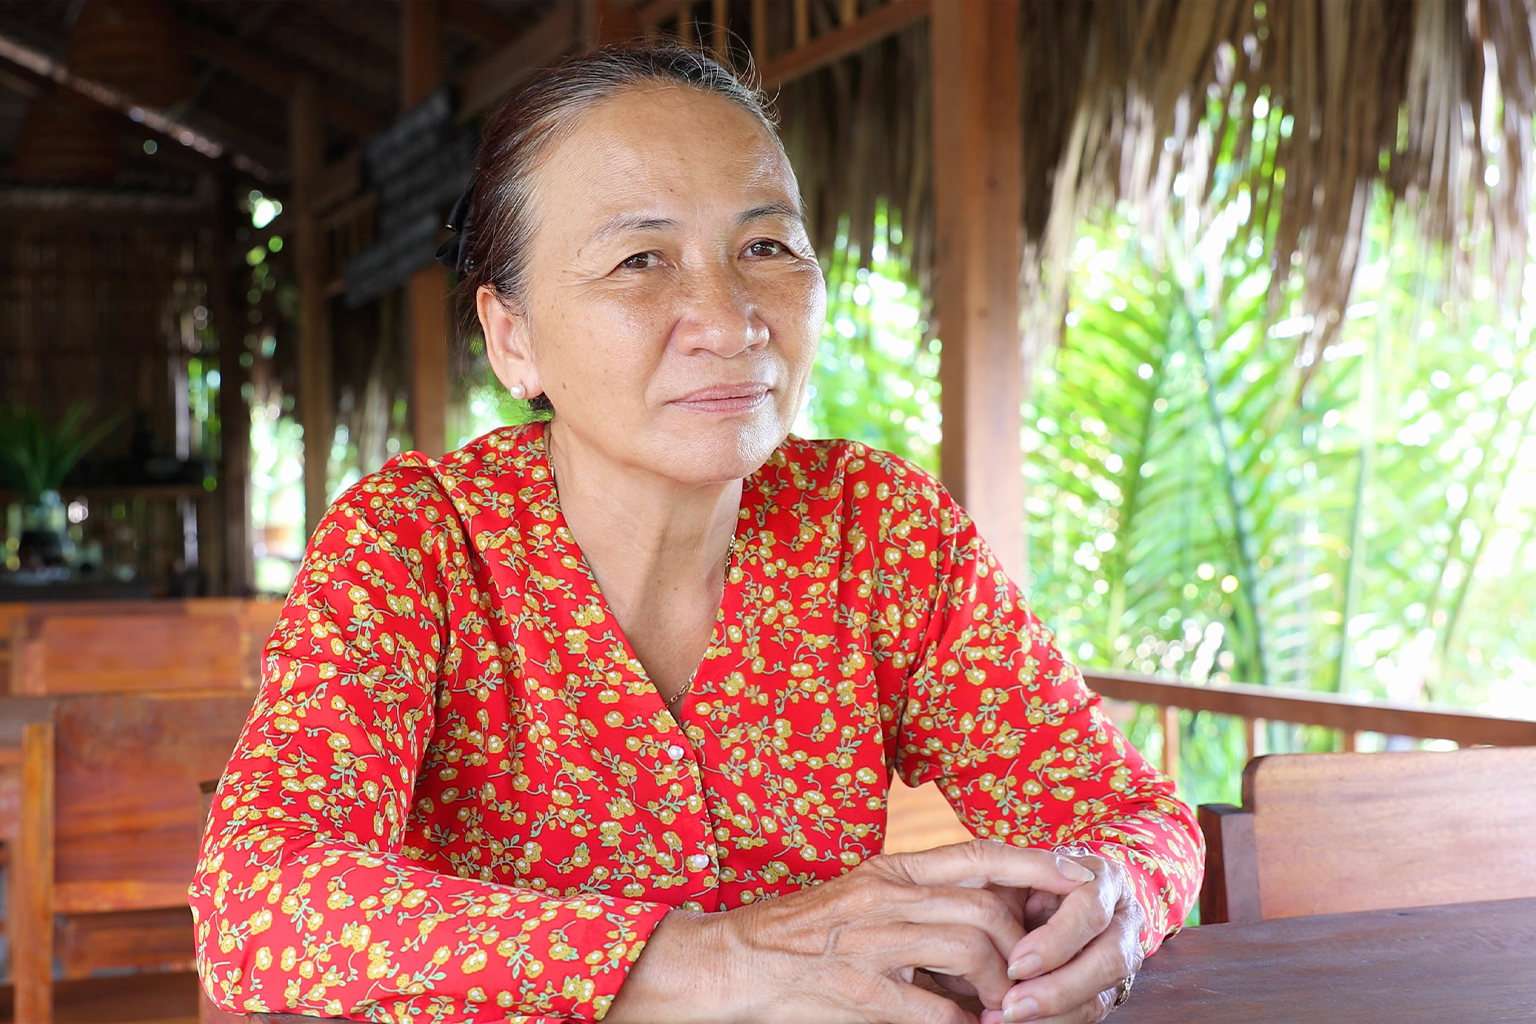 Nguyen Thi Bich Van lives on the island and is the head of Con Chim Women's Union.